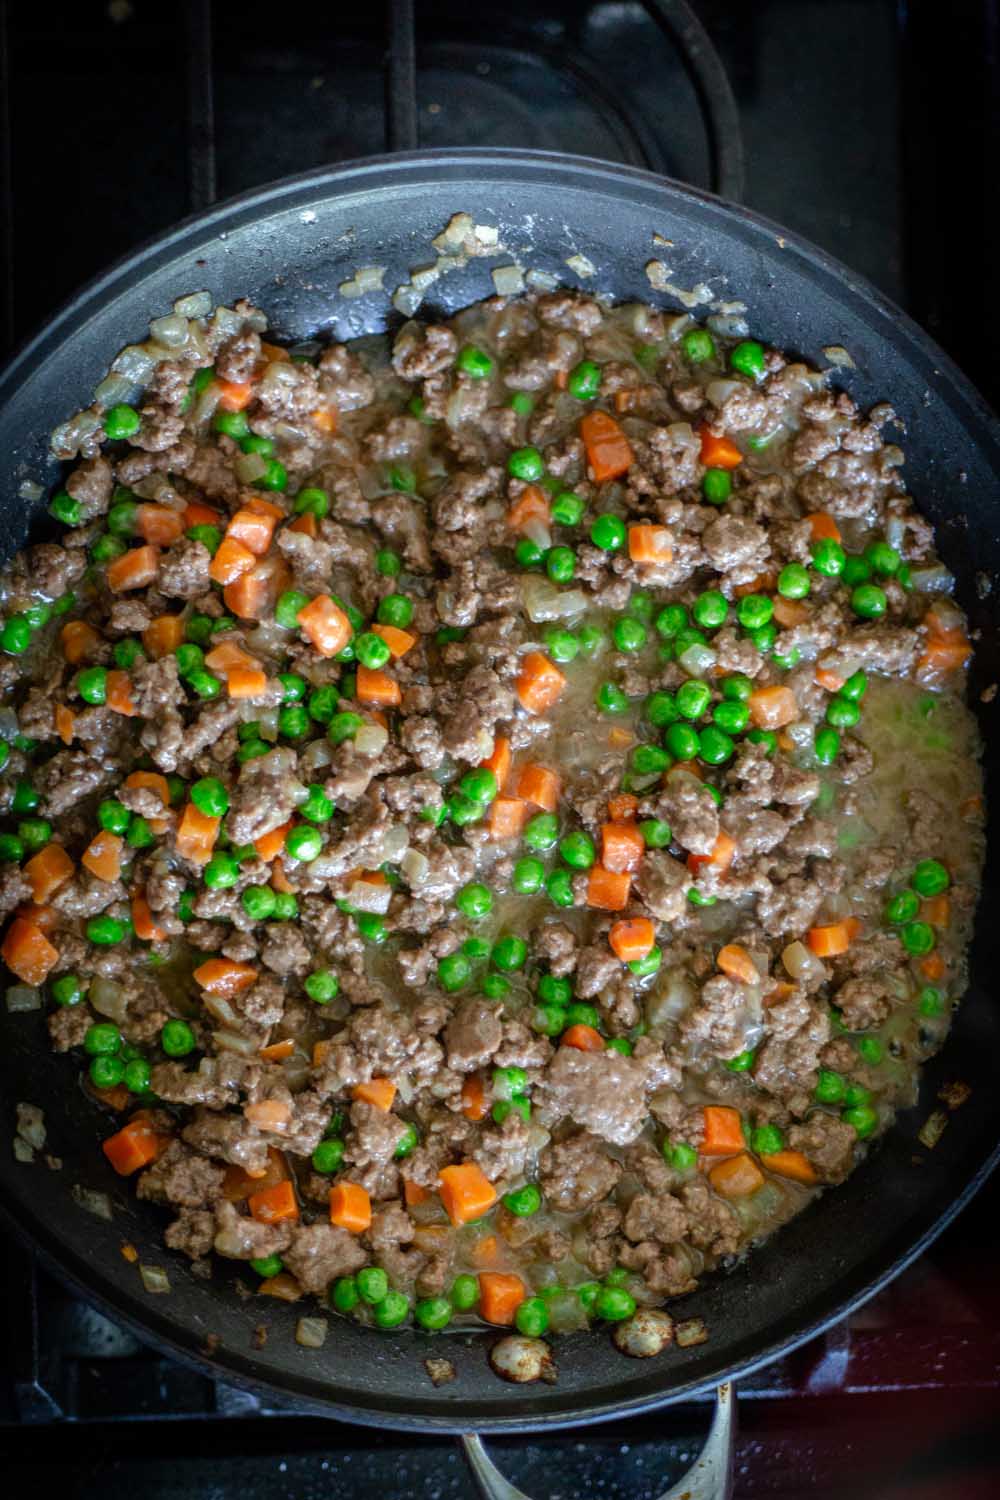 meat, peas, and carrots cooking in a skillet